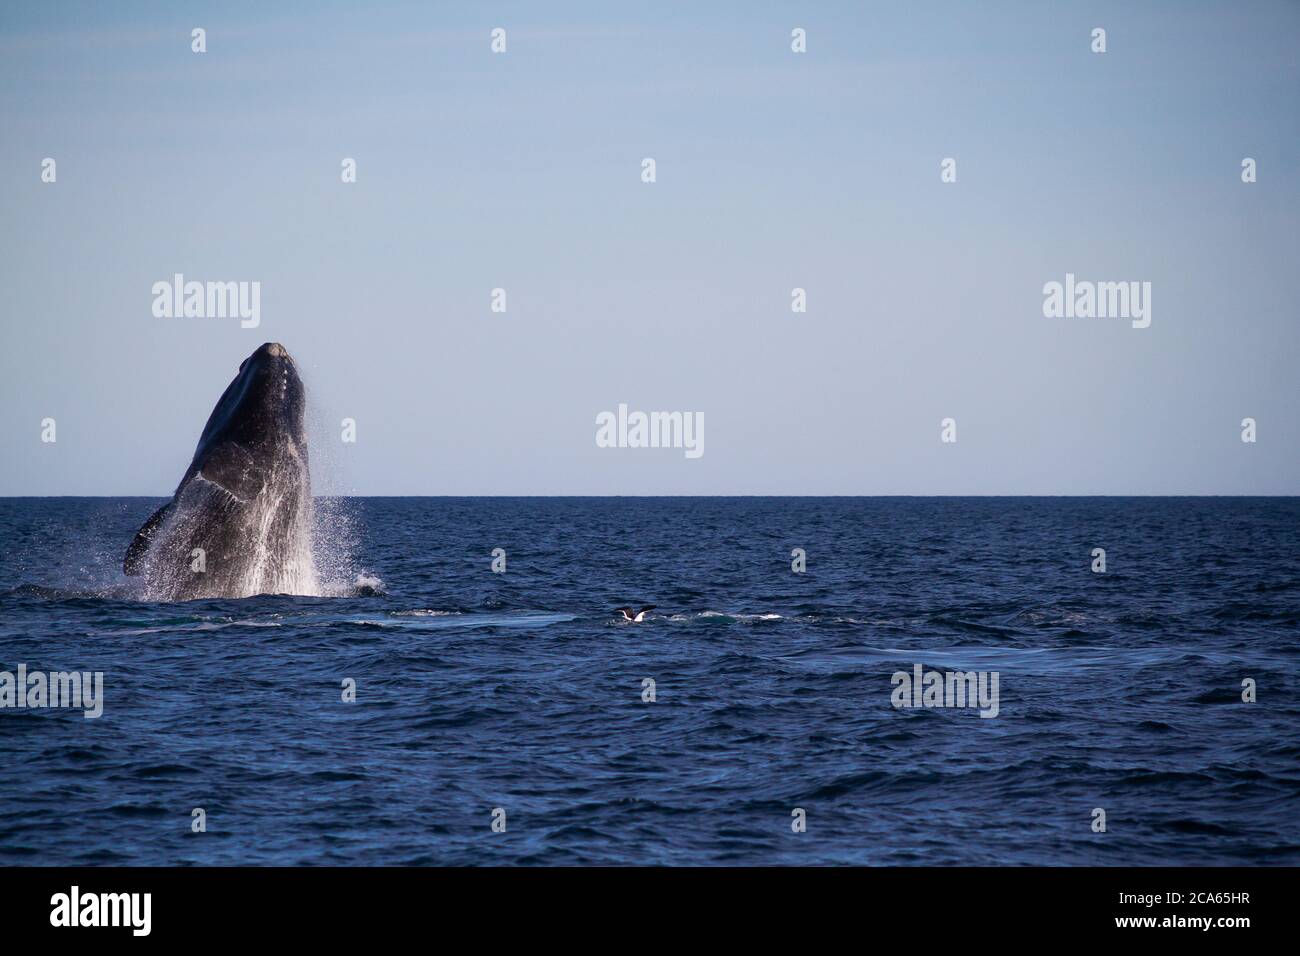 Whale jumping in Peninsula Valdes,Puerto Madryn, Patagonia, Arg Stock Photo